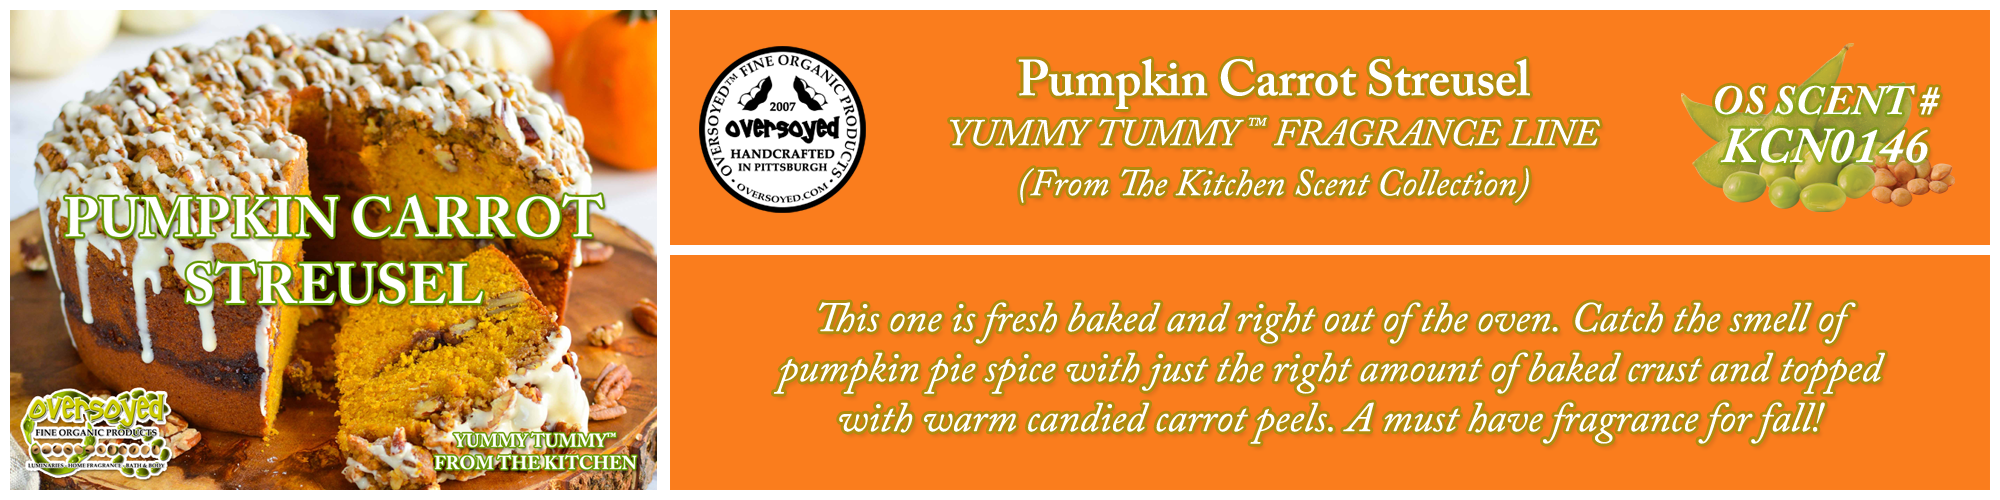 Pumpkin Carrot Streusel Handcrafted Products Collection